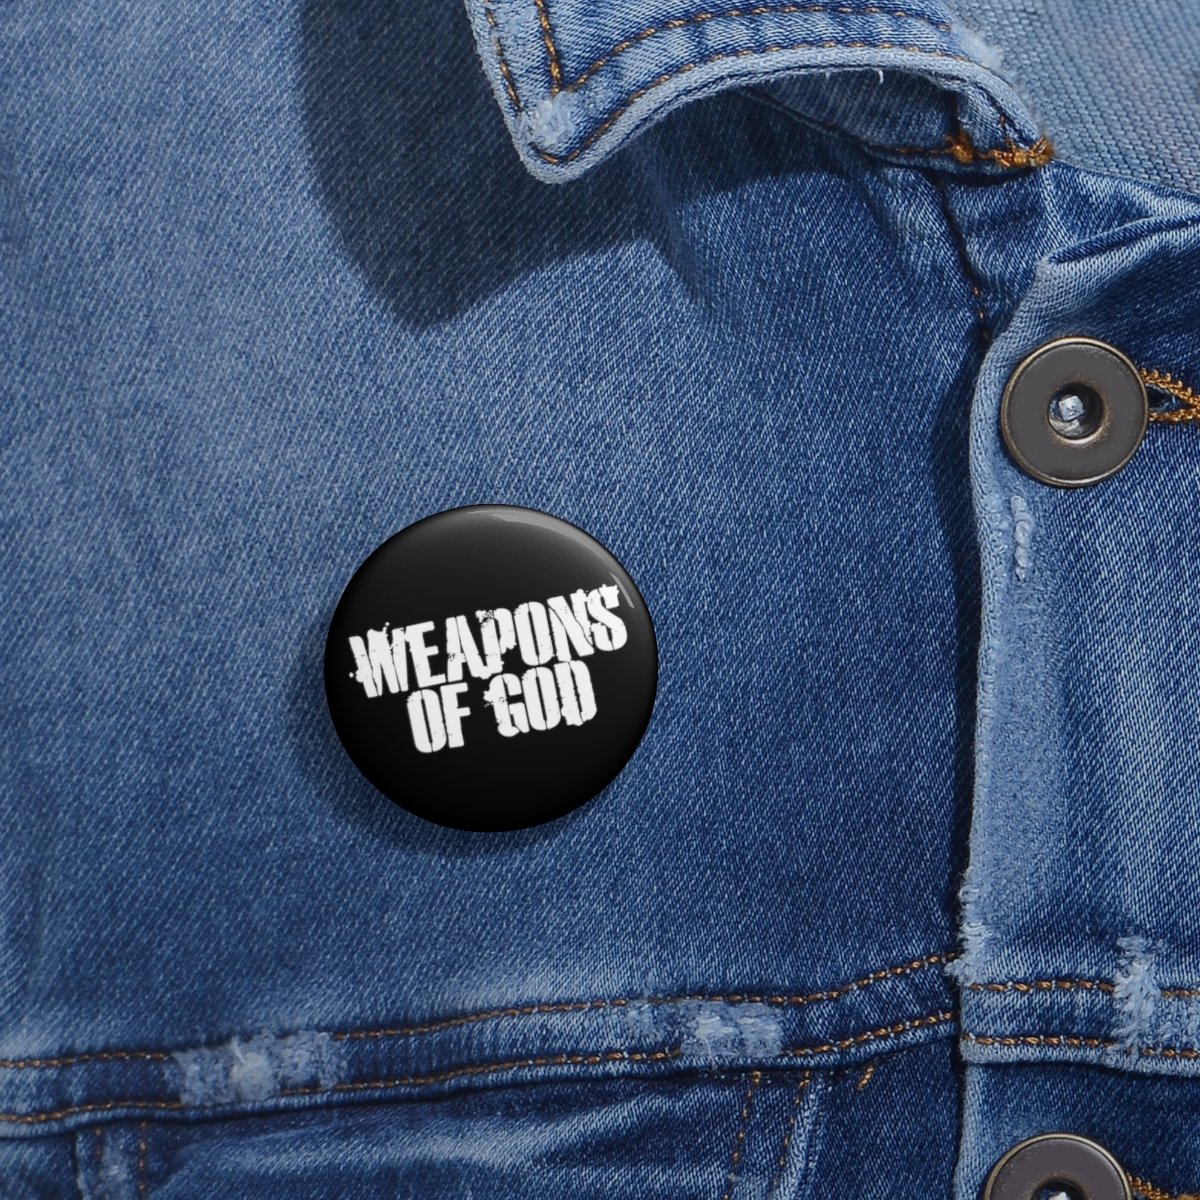 Weapons of God Logo Pin Buttons